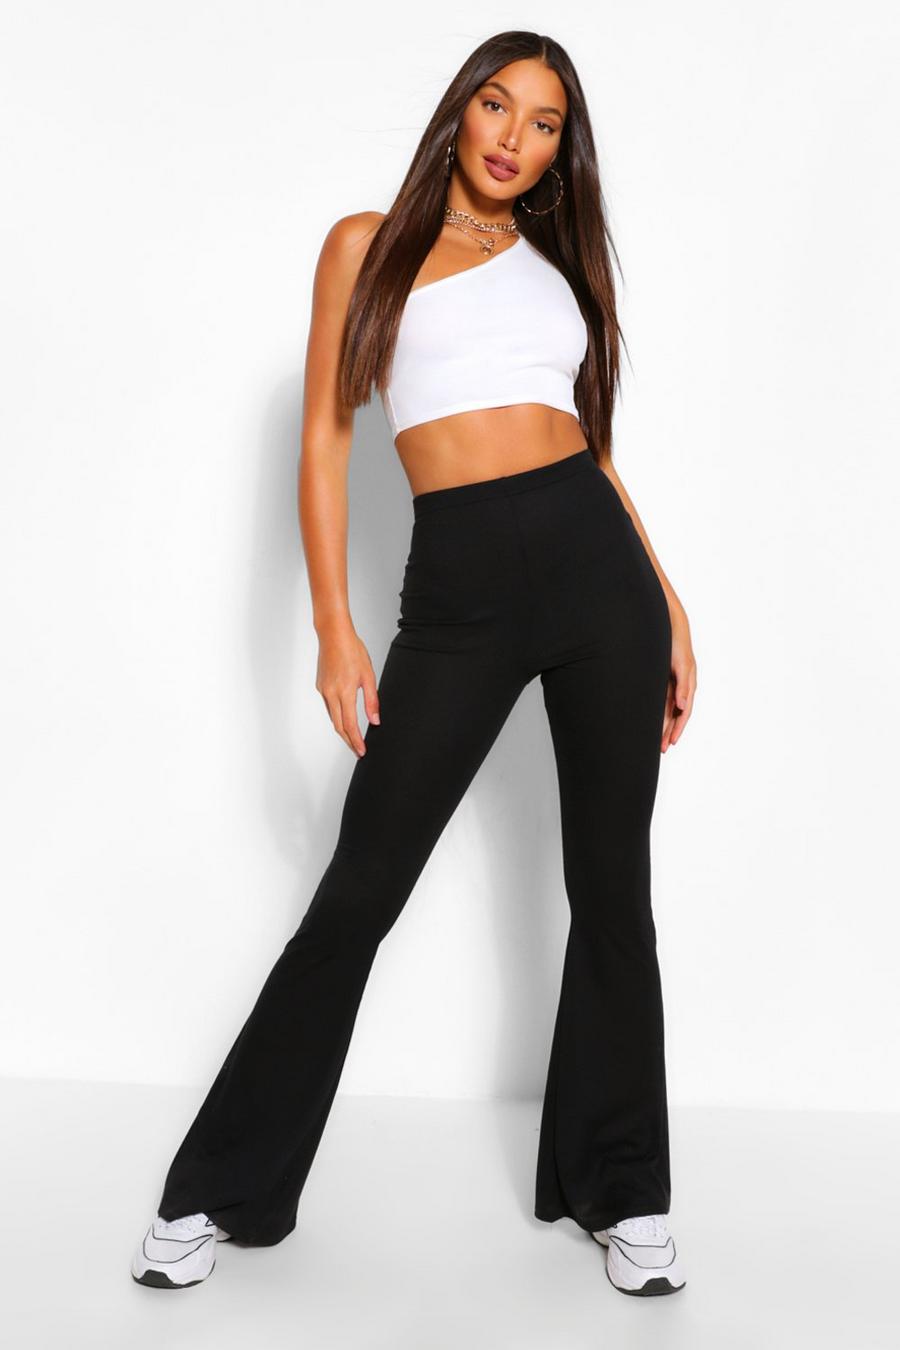 Boohoo Soft Rib Knit Long Sleeve Top And Leggings Co-ord in Black